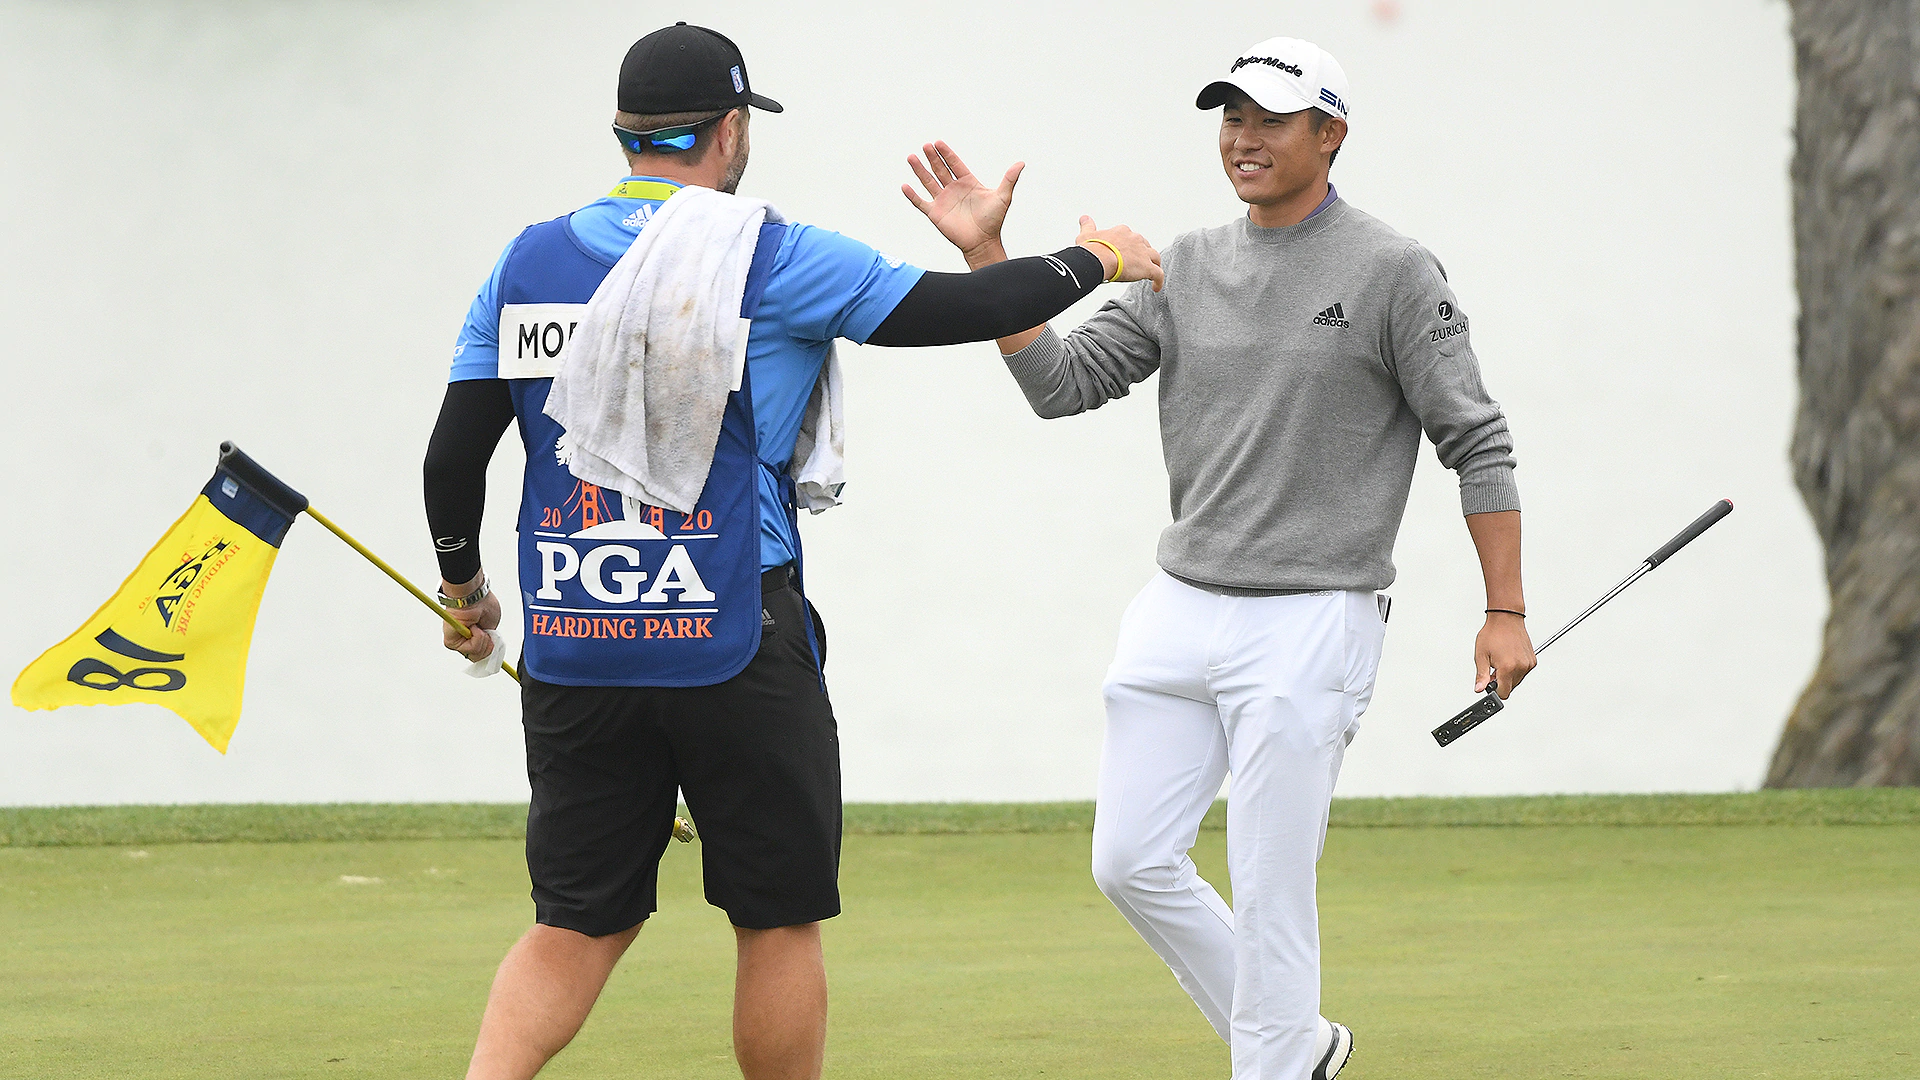 PGA Championship payout: What each player, including Collin Morikawa, took home